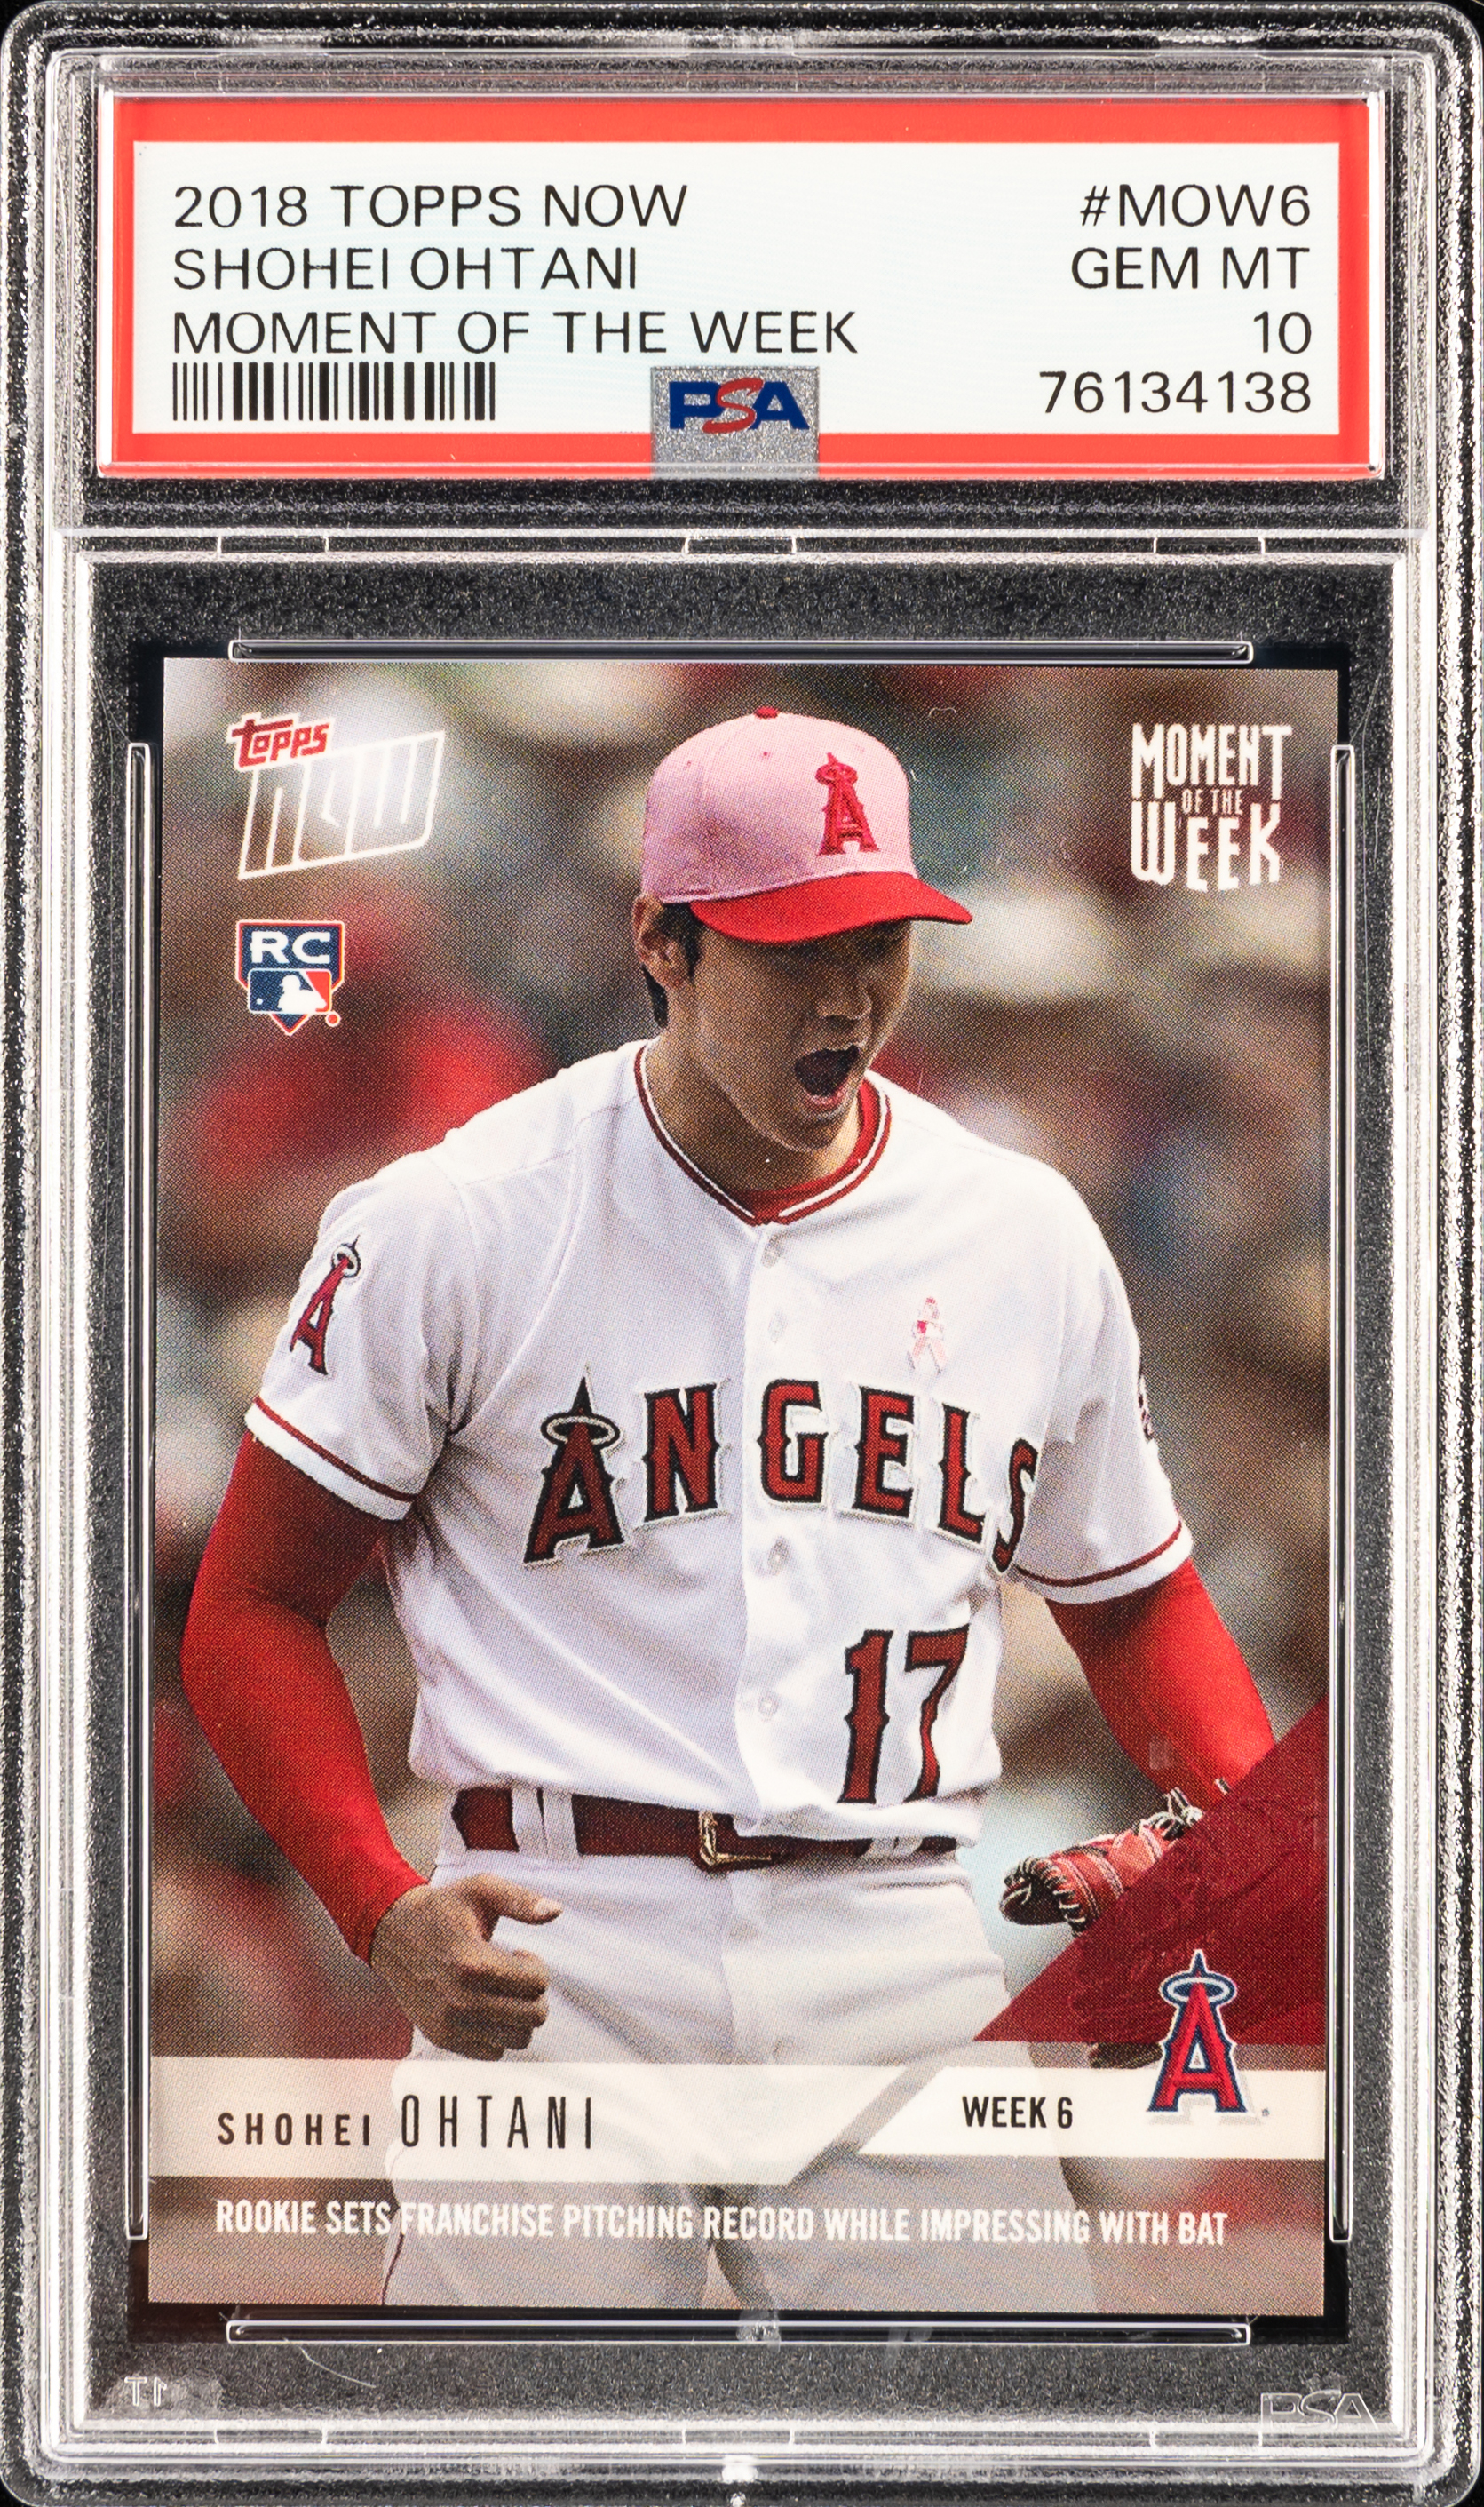 2018 Topps Now Moment Of The Week #MOW6 Shohei Ohtani Rookie Card – PSA GEM MT 10